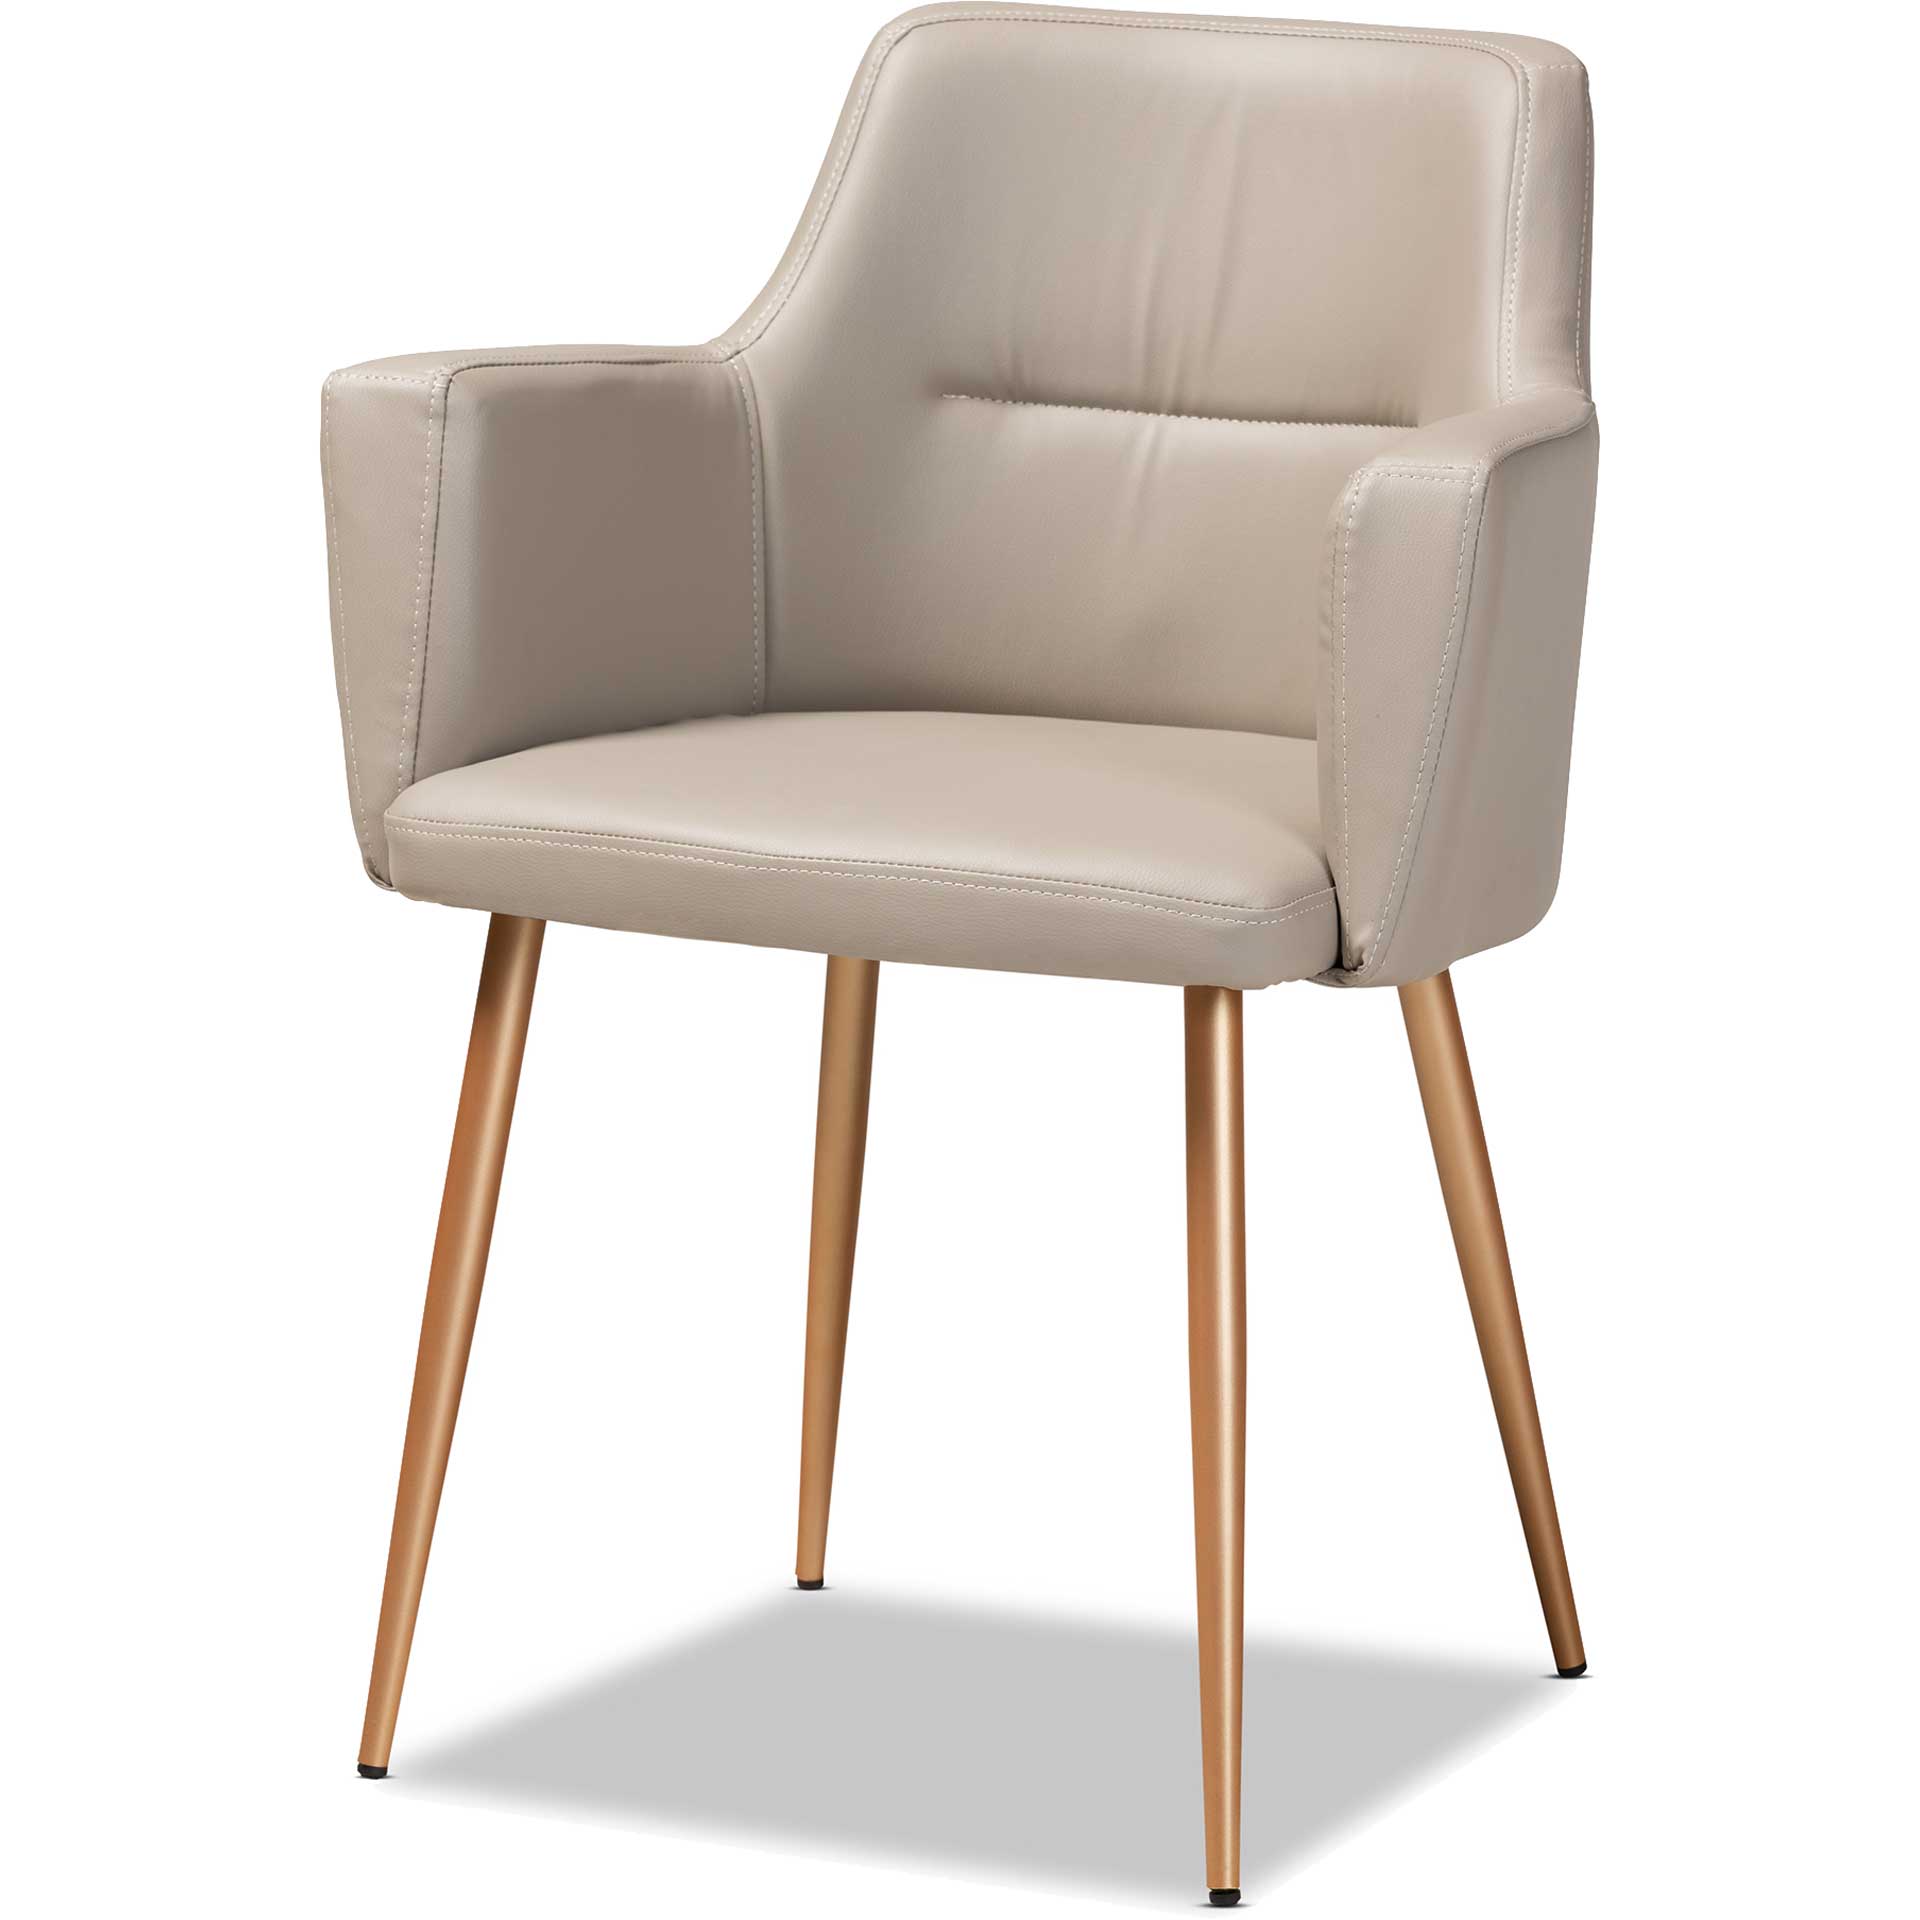 Macari Faux Leather Upholstered Dining Chair Beige/Gold